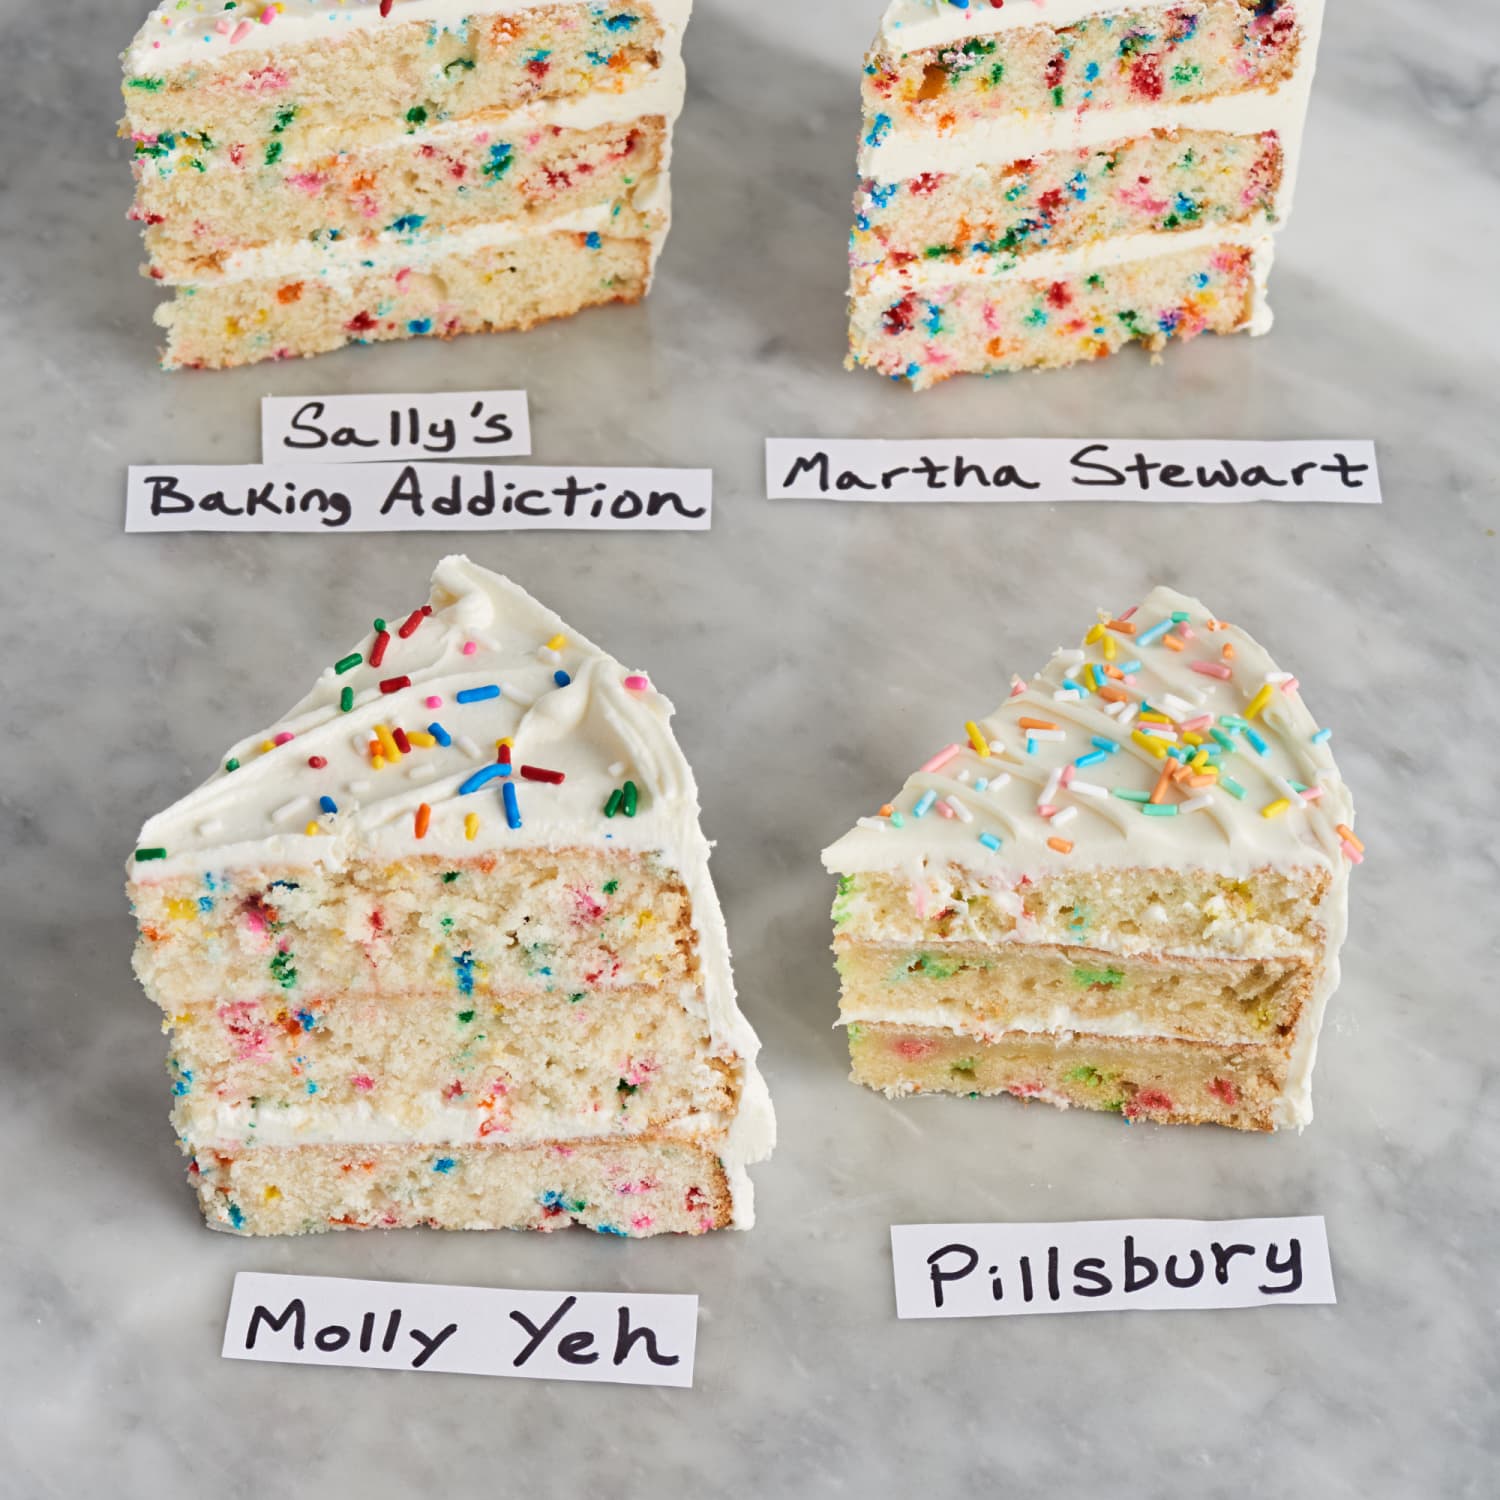 I Tried 4 Famous Funfetti Cake Recipes and the Winner Was Clear ...